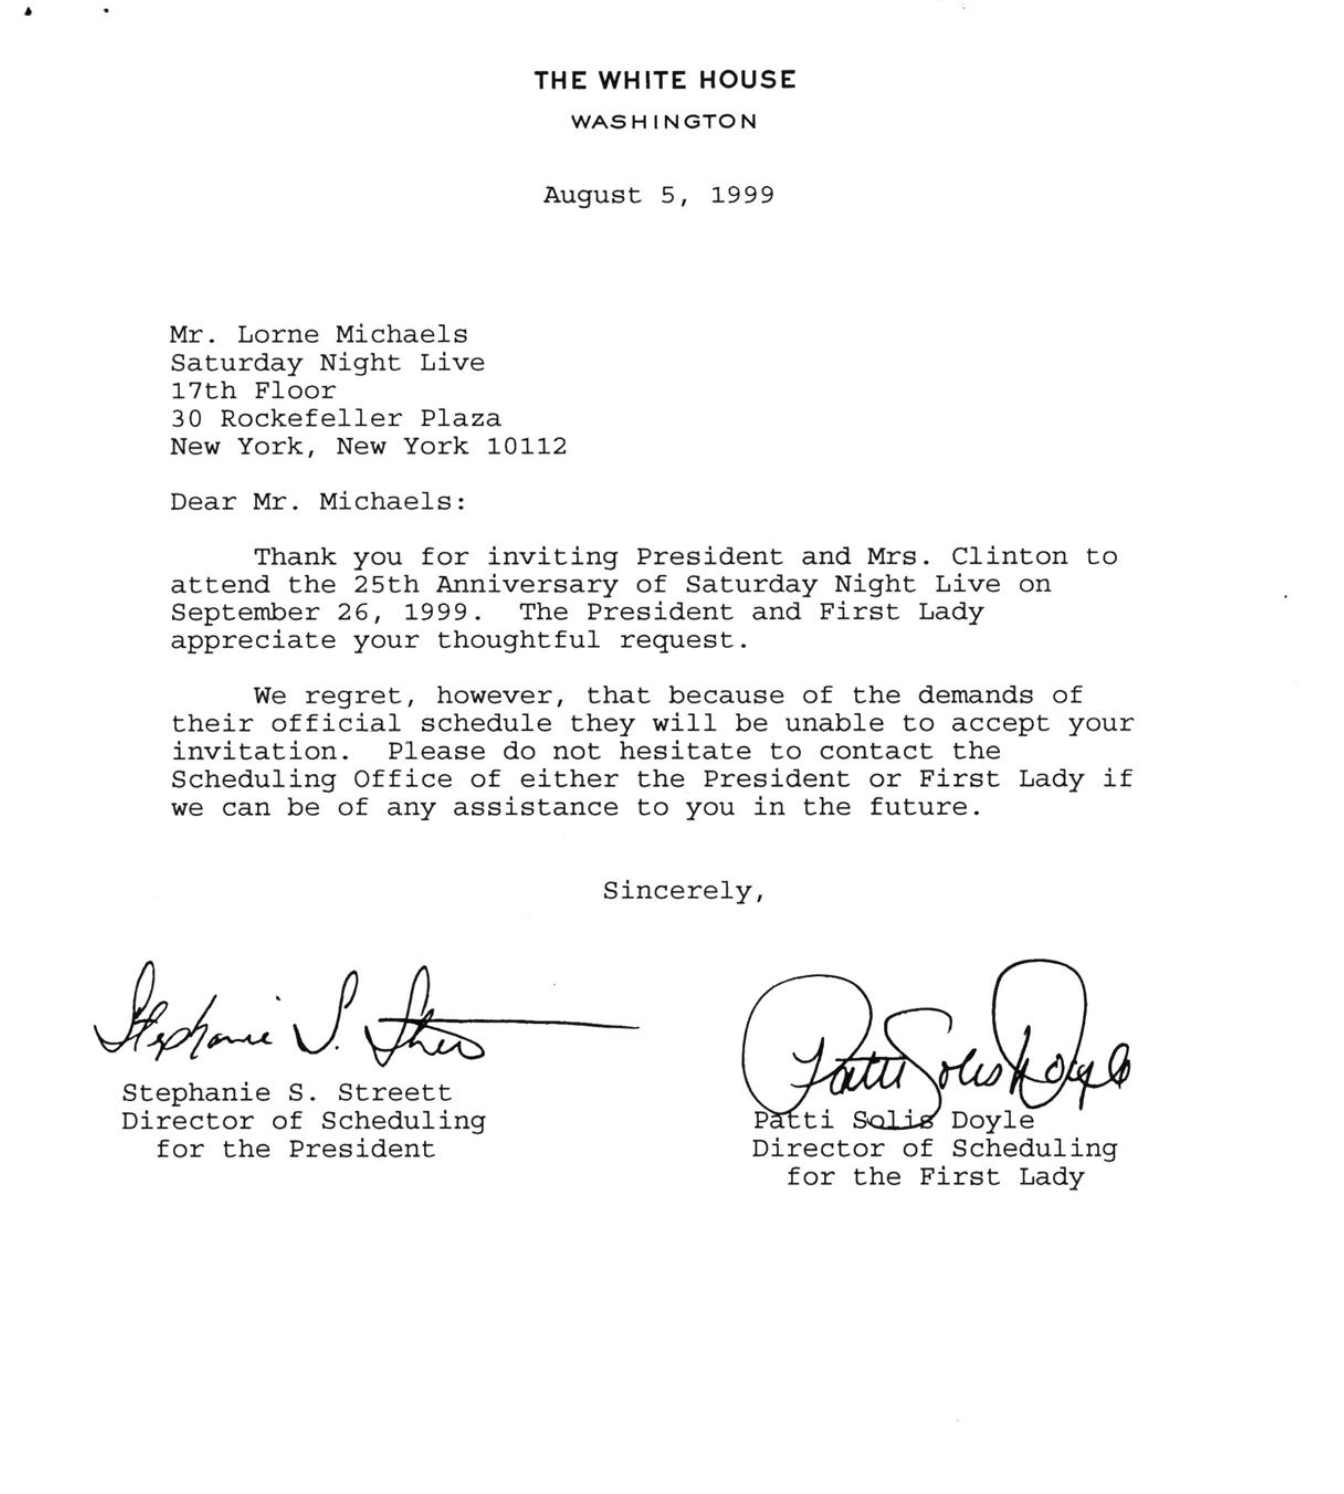 Letter from the White House scheduling office reading: "Dear Mr. Michaels: Thank you for inviting President and Mrs. Clinton to attend the 25th Anniversary of Saturday Night Live on September 26, 1999. The President and First Lady appreciate your thoughtful request. We regret, however, that because of the demands of their official schedule they will be unable to accept your invitation. Please do not hesitate to contact the Scheduling Office of either the President or First Lady if we can be of any assistance to you in the future." Signed by Stephanie S. Streett, Director of Scheduling for the President, and Patti Solis Doyle, Director of Scheduling for the First Lady.